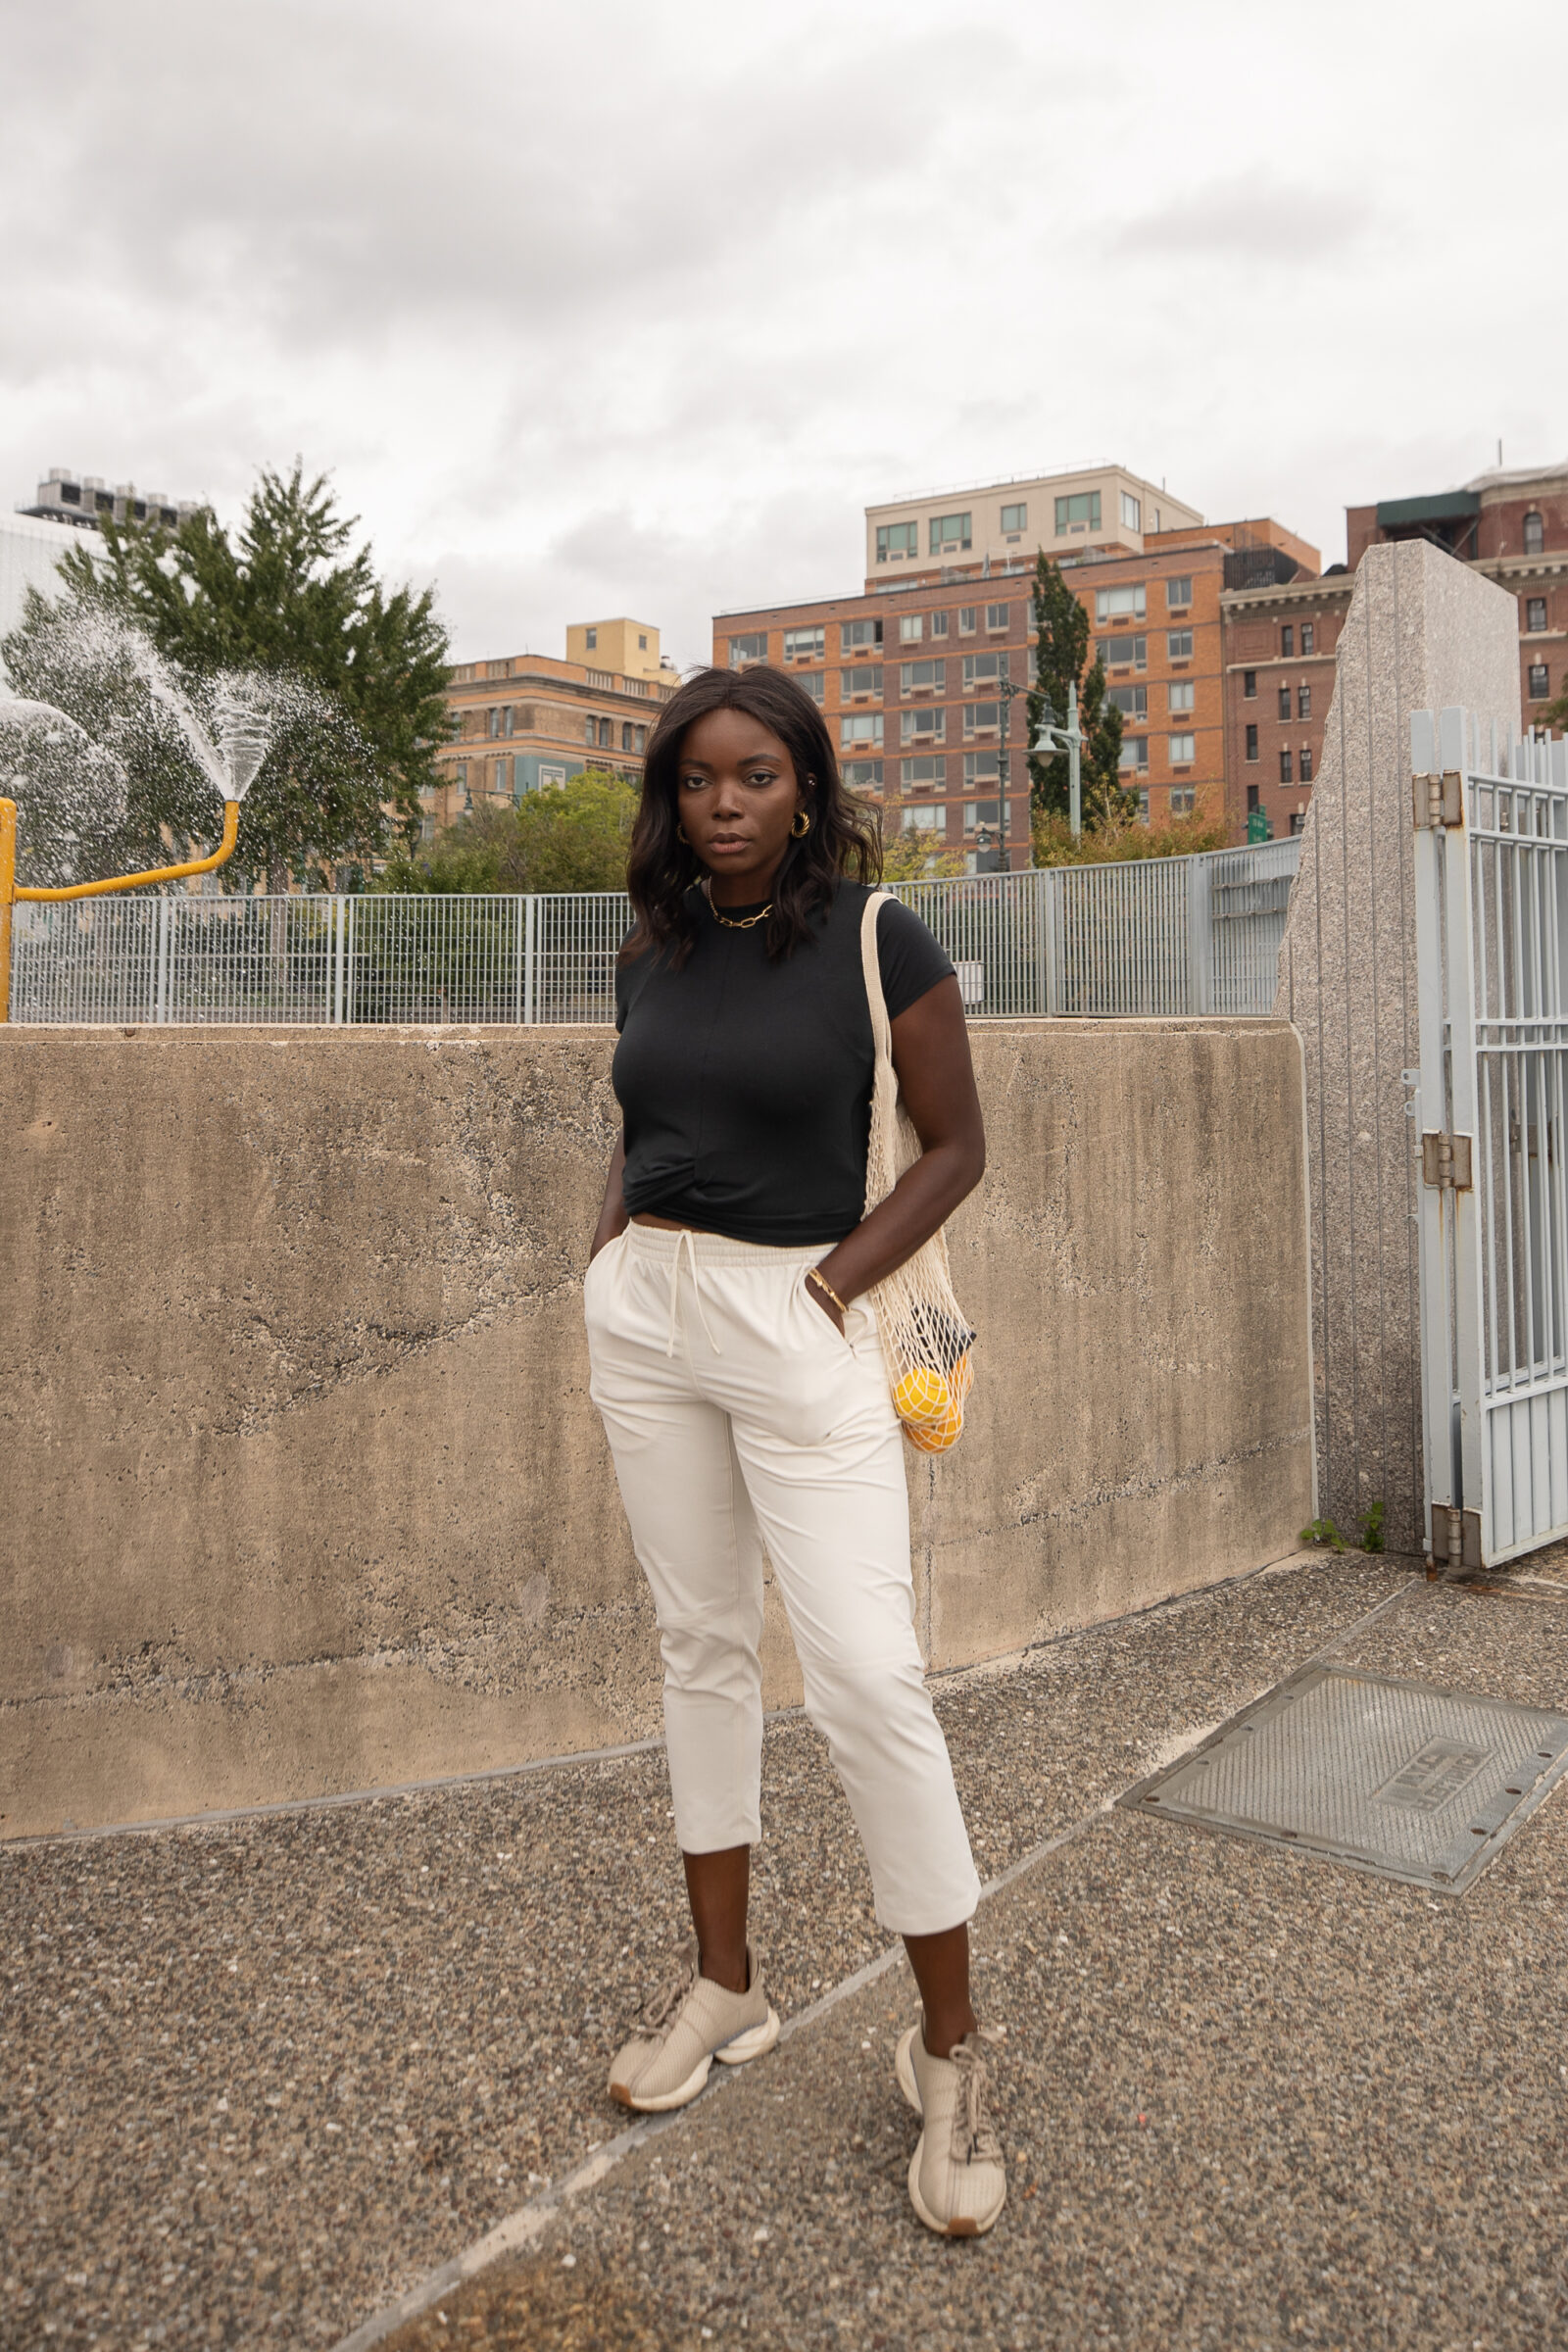 Outdoor Voices RecTrek Pant: Styling & Review » coco bassey